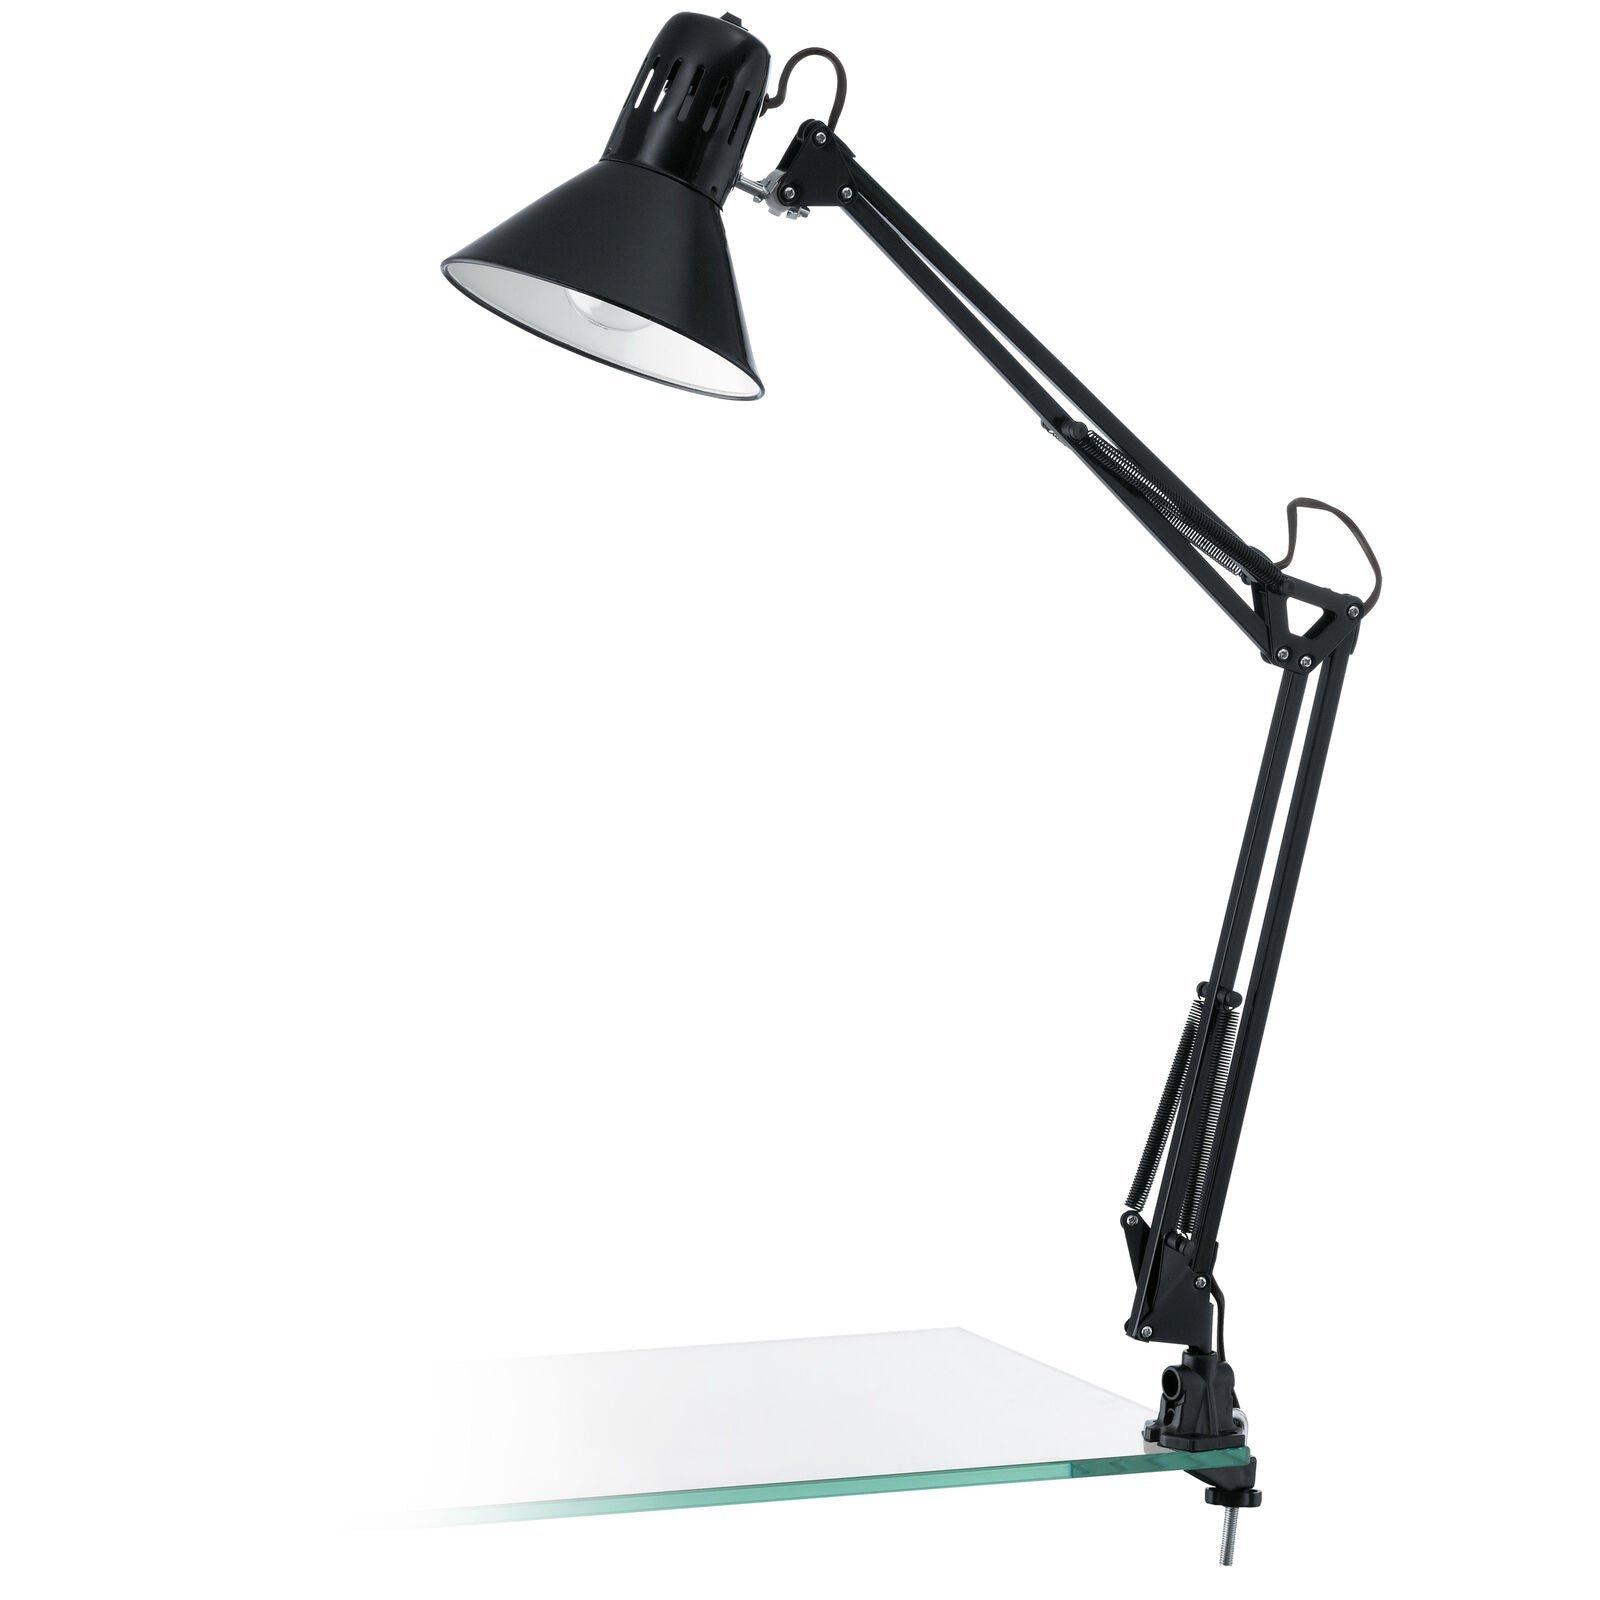 Table Desk Lamp Shiny Black Steel Moveable In Line Switch Bulb E27 1x40W